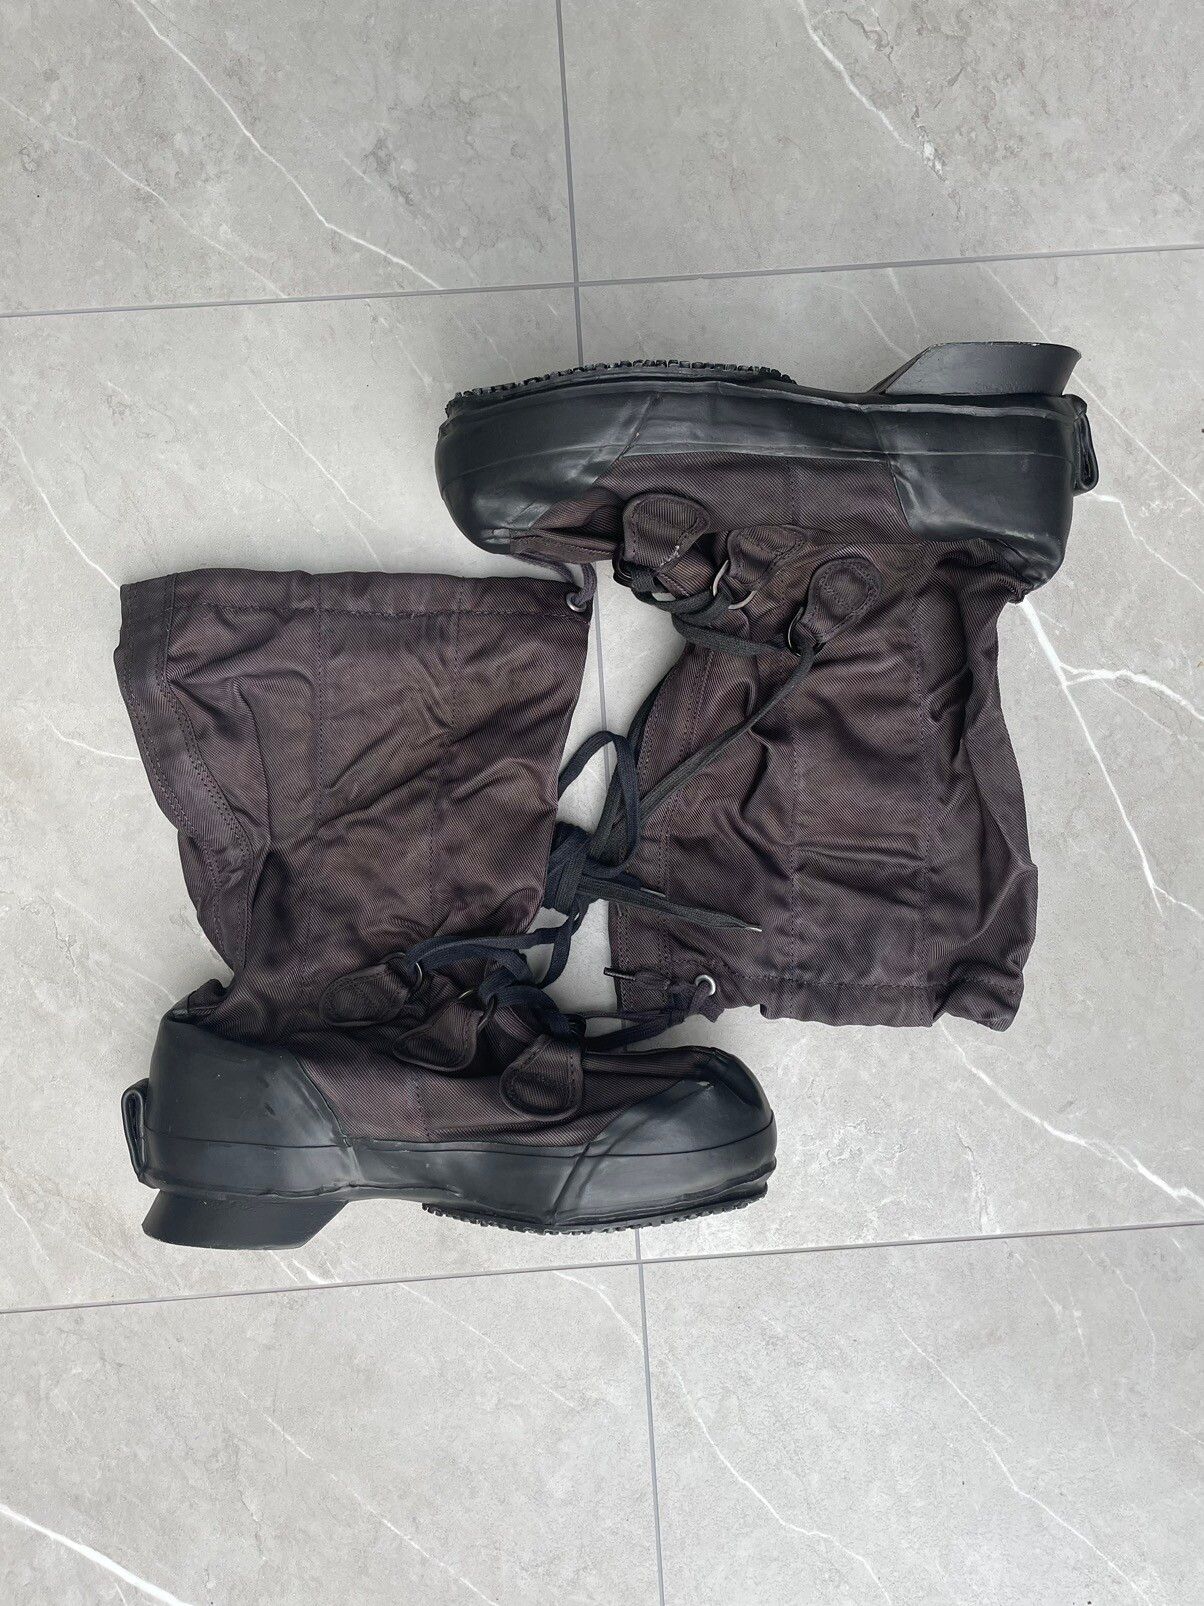 Pre-owned Combat Boots X Military 1980s Black Muk Boots